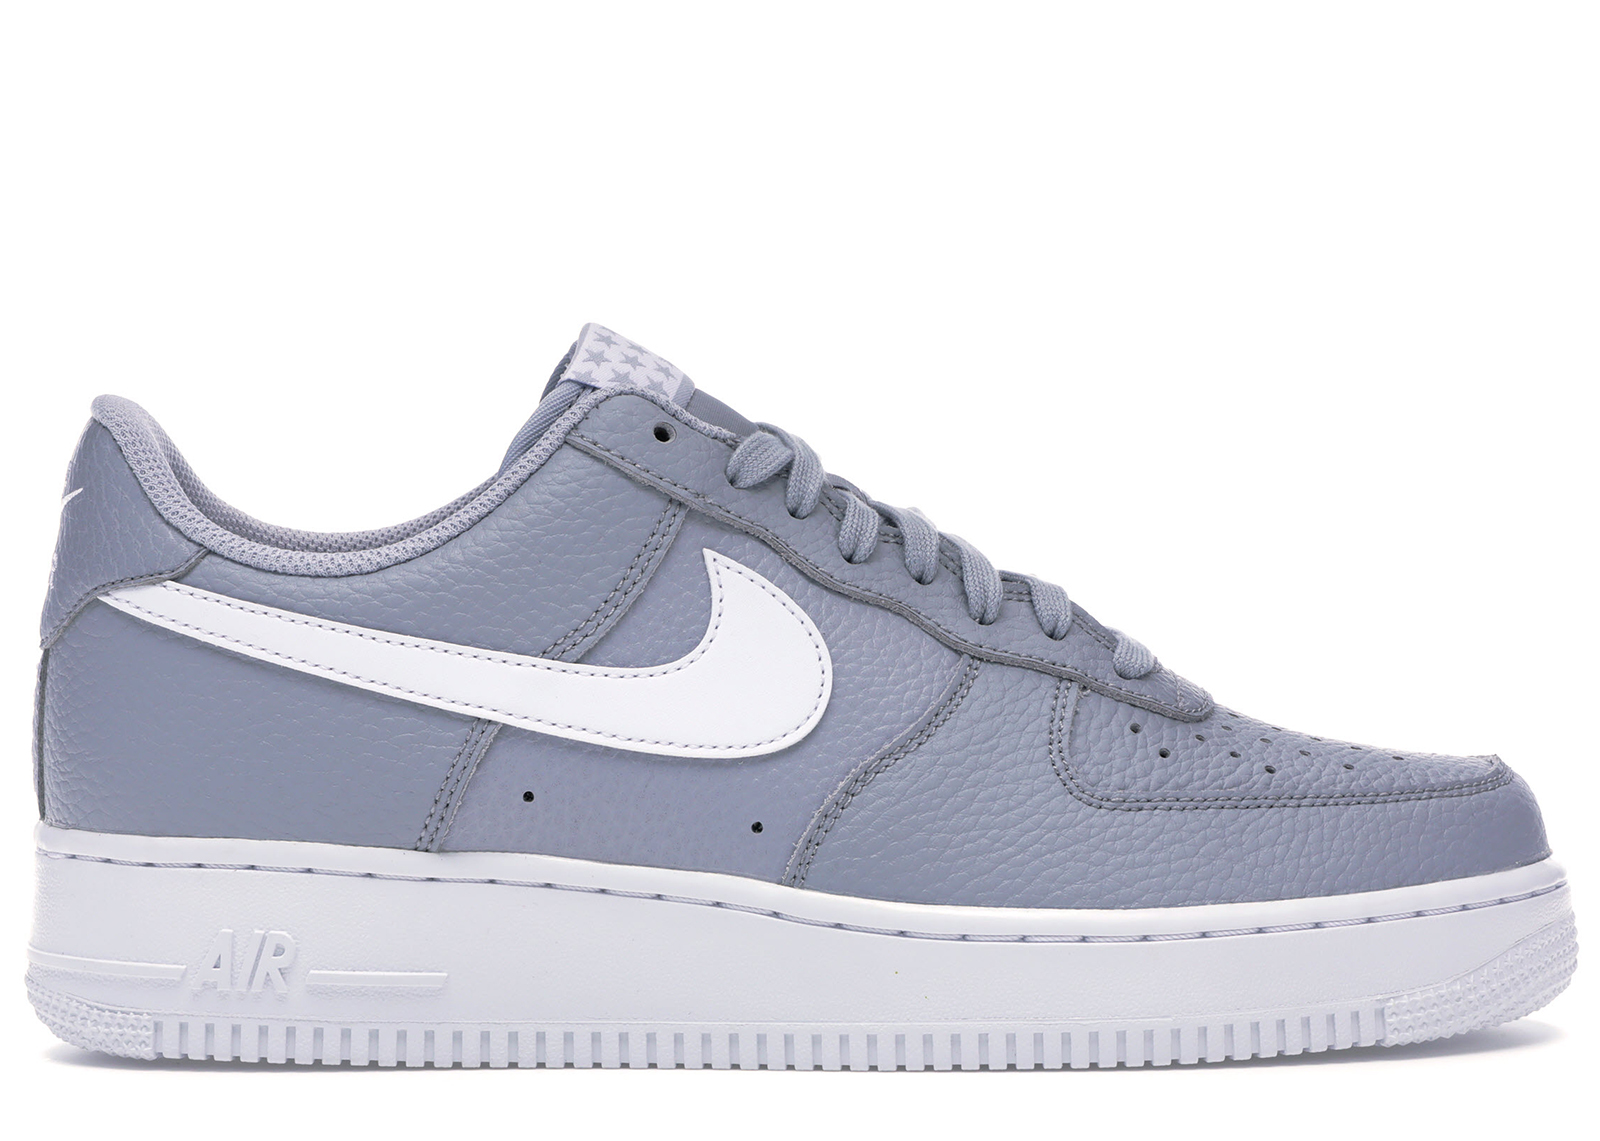 Nike Air Force 1 Low Dusty Blue Suede メンズ - DH0265-400 - JP